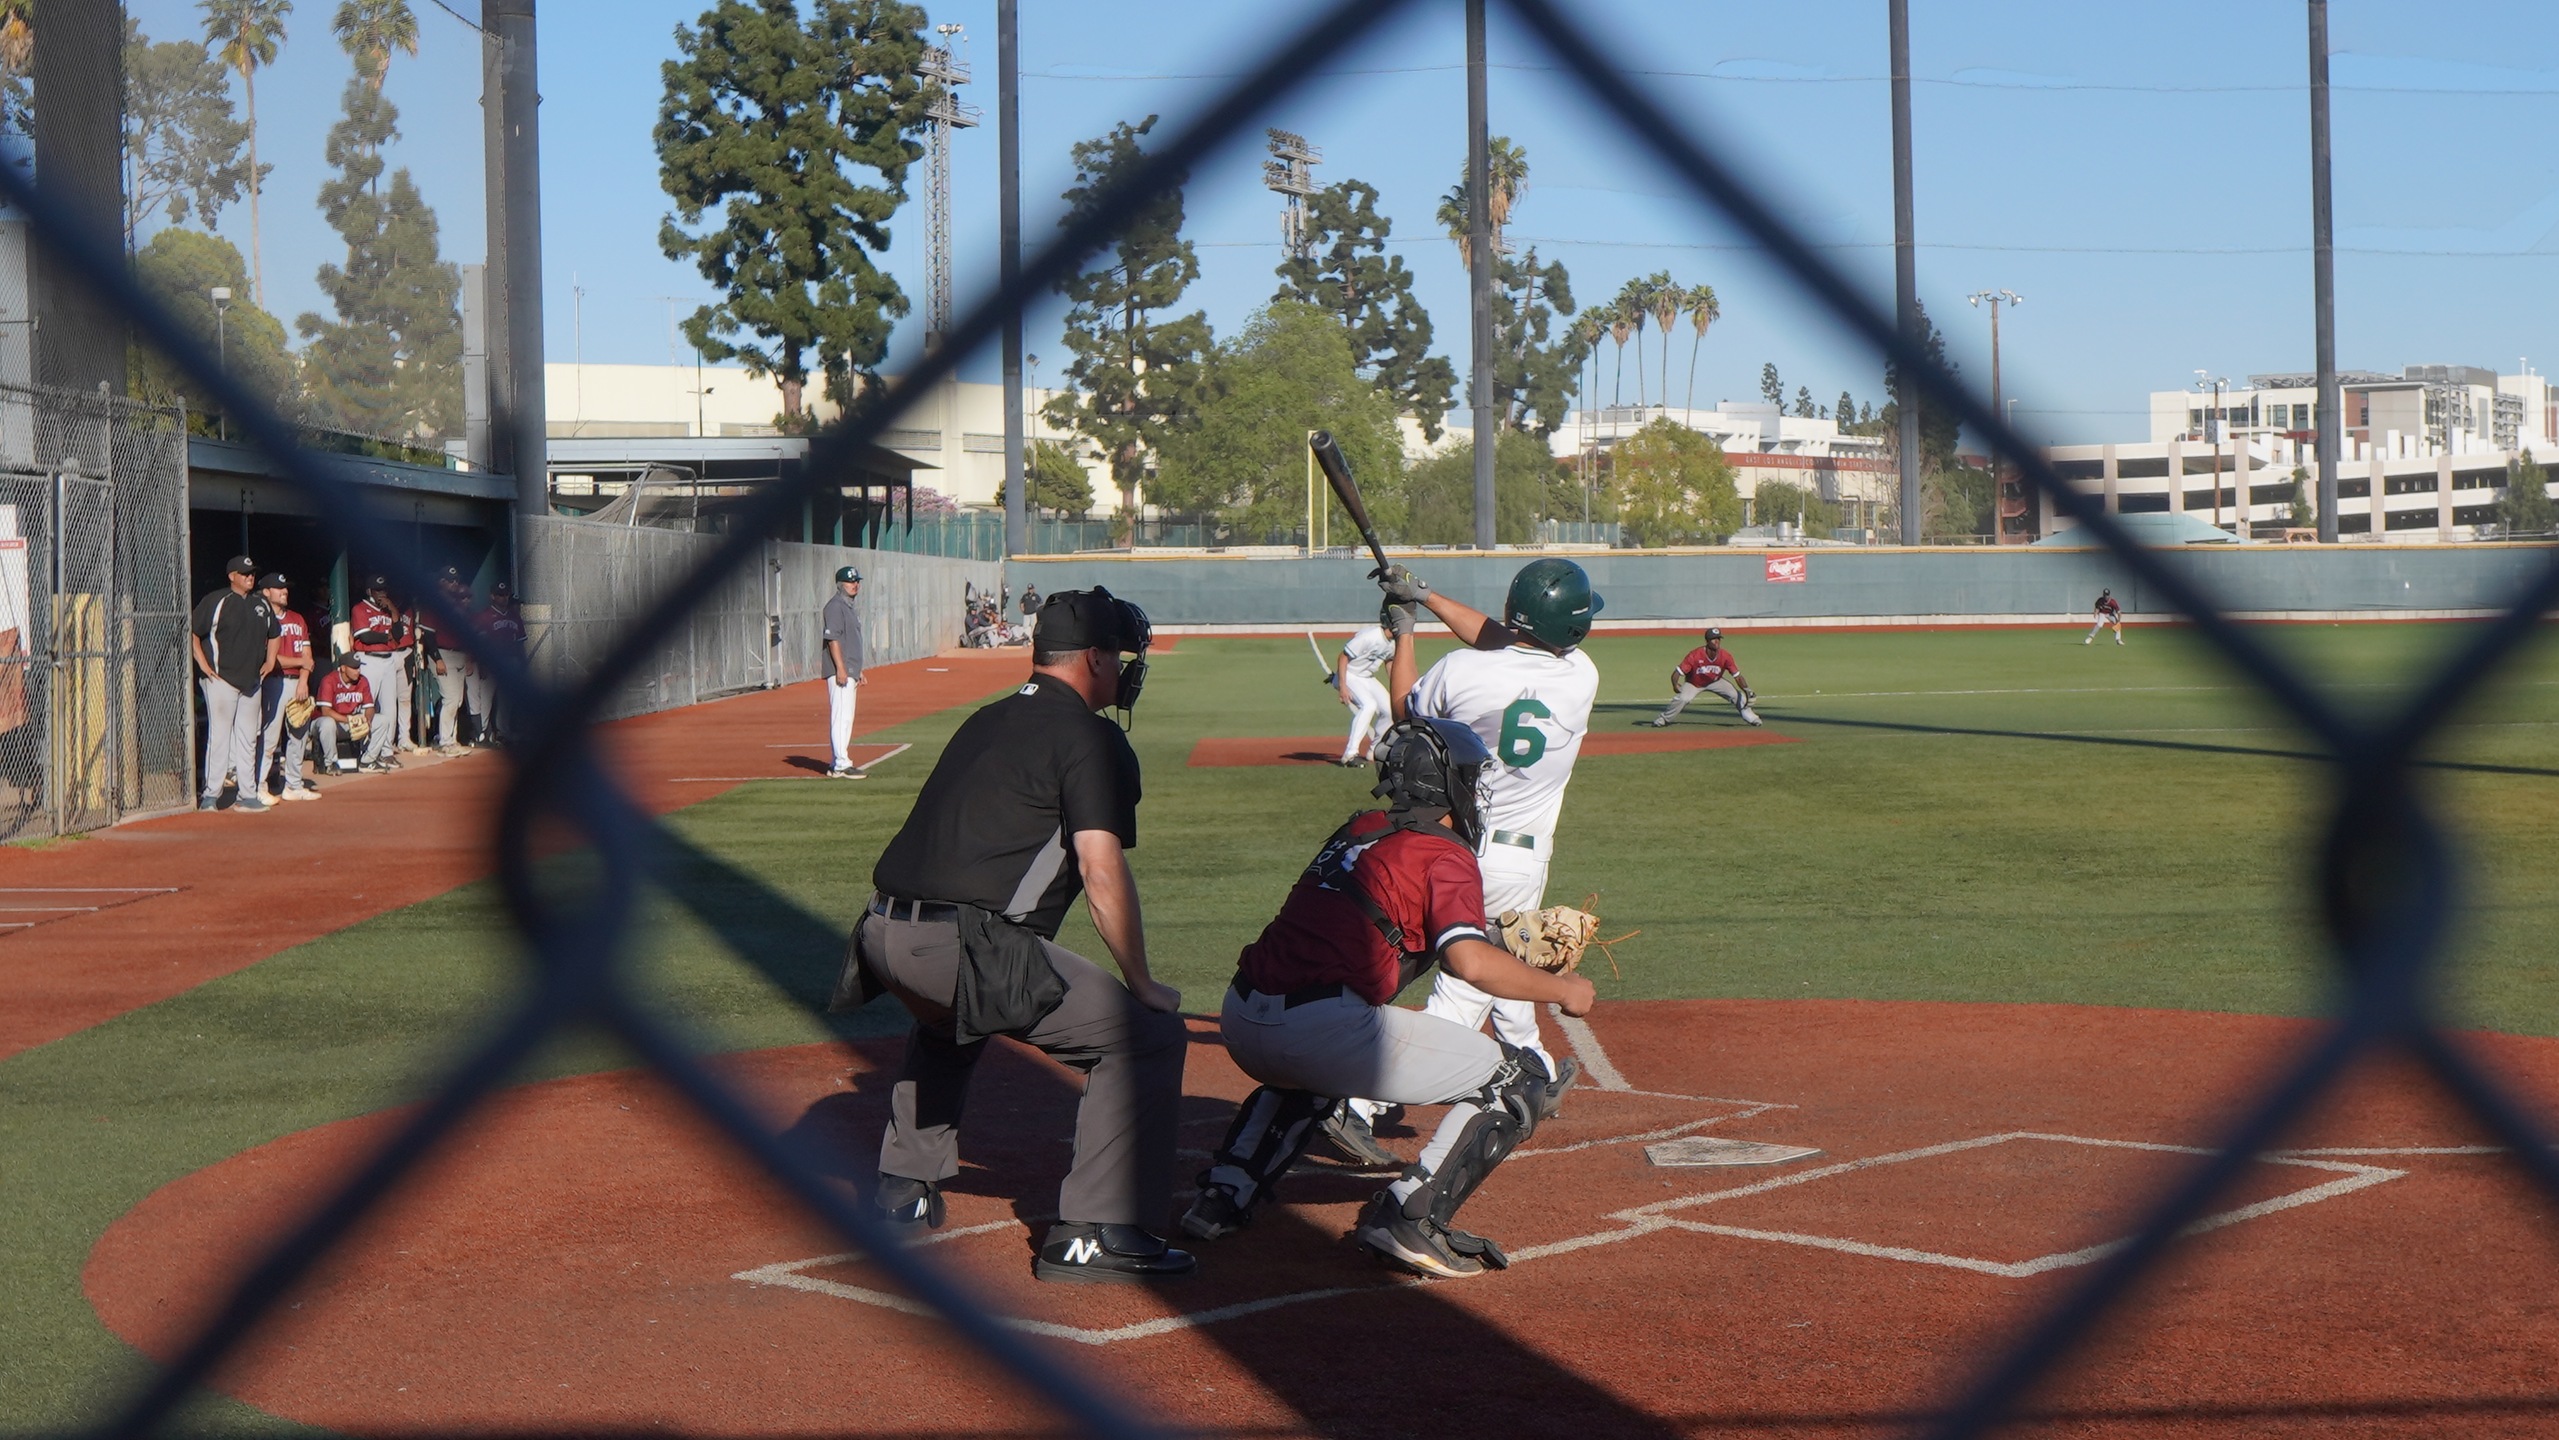 #6 Daniel Vierra swings and hits a ball through the right-center gap in the infield for the game winning hit.